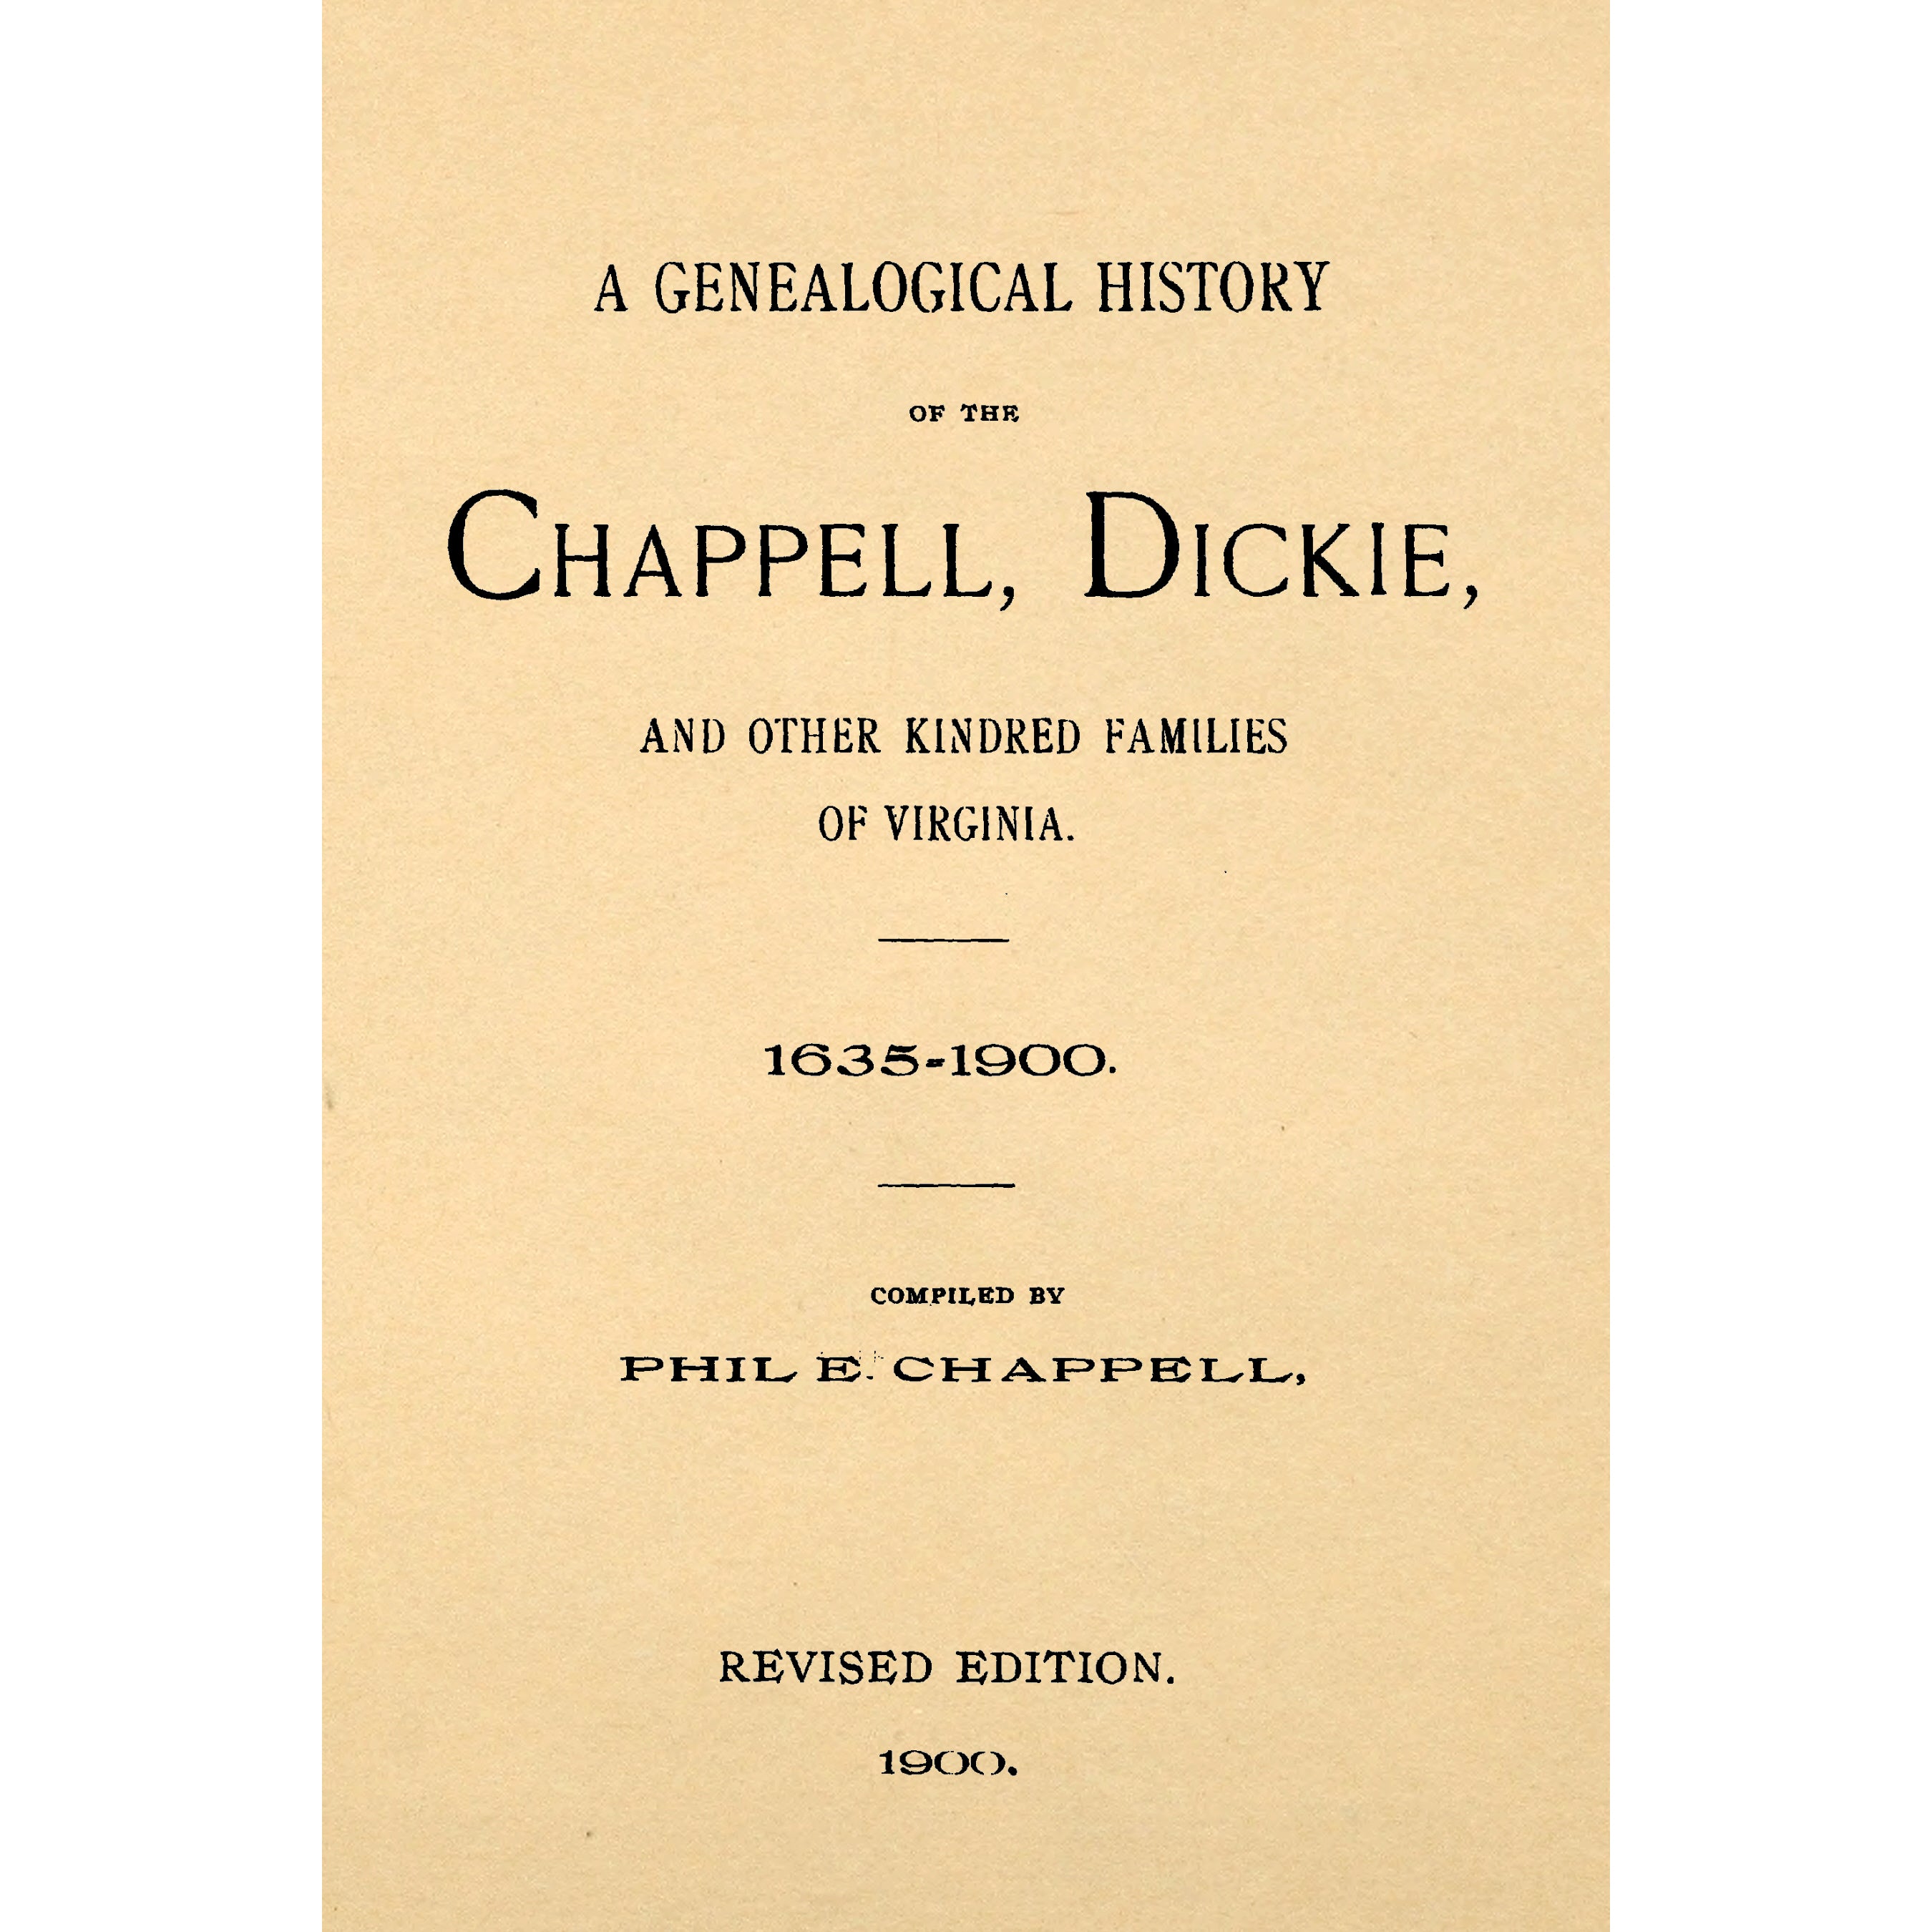 A Genealogical History of the Chappell, Dickie and Kindred Families of Virginia 1635 - 1900